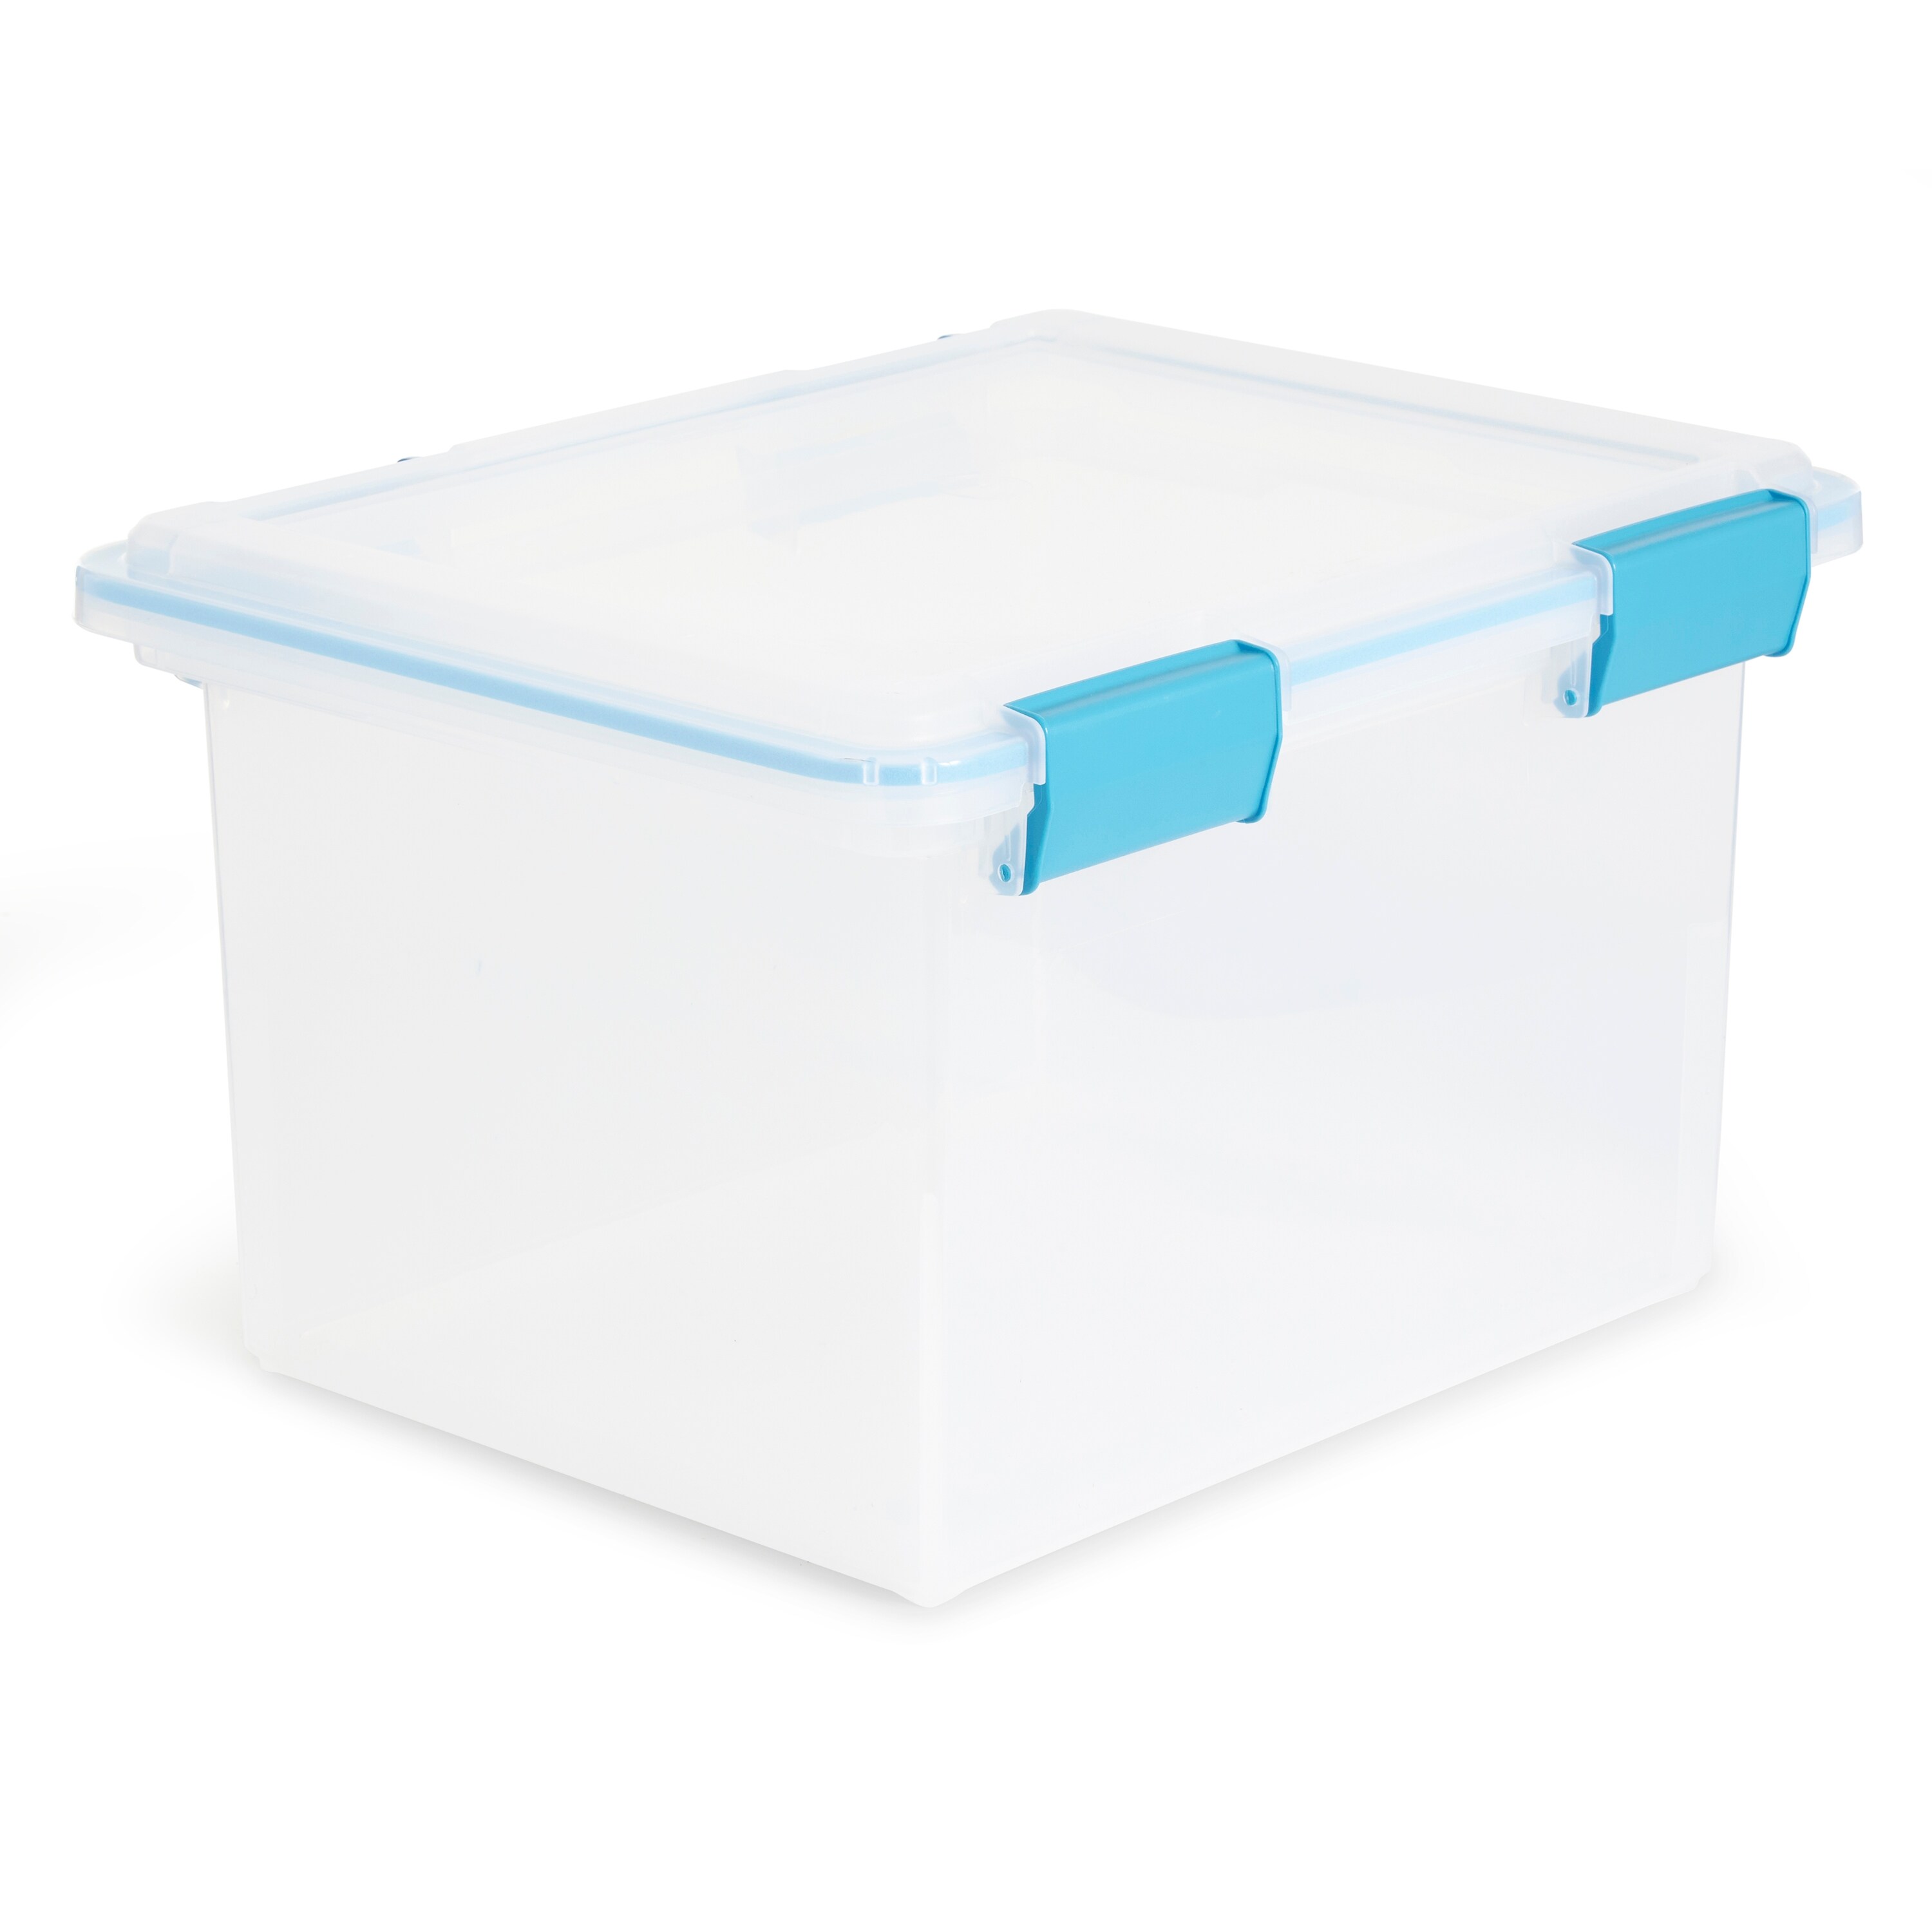 https://ak1.ostkcdn.com/images/products/is/images/direct/3bd3999802a359ac35f5156fa1953fc975803f73/Sterilite-32-Quart-Clear-Stacking-Storage-Container-with-Gasket-Lid%2C-12-Pack.jpg